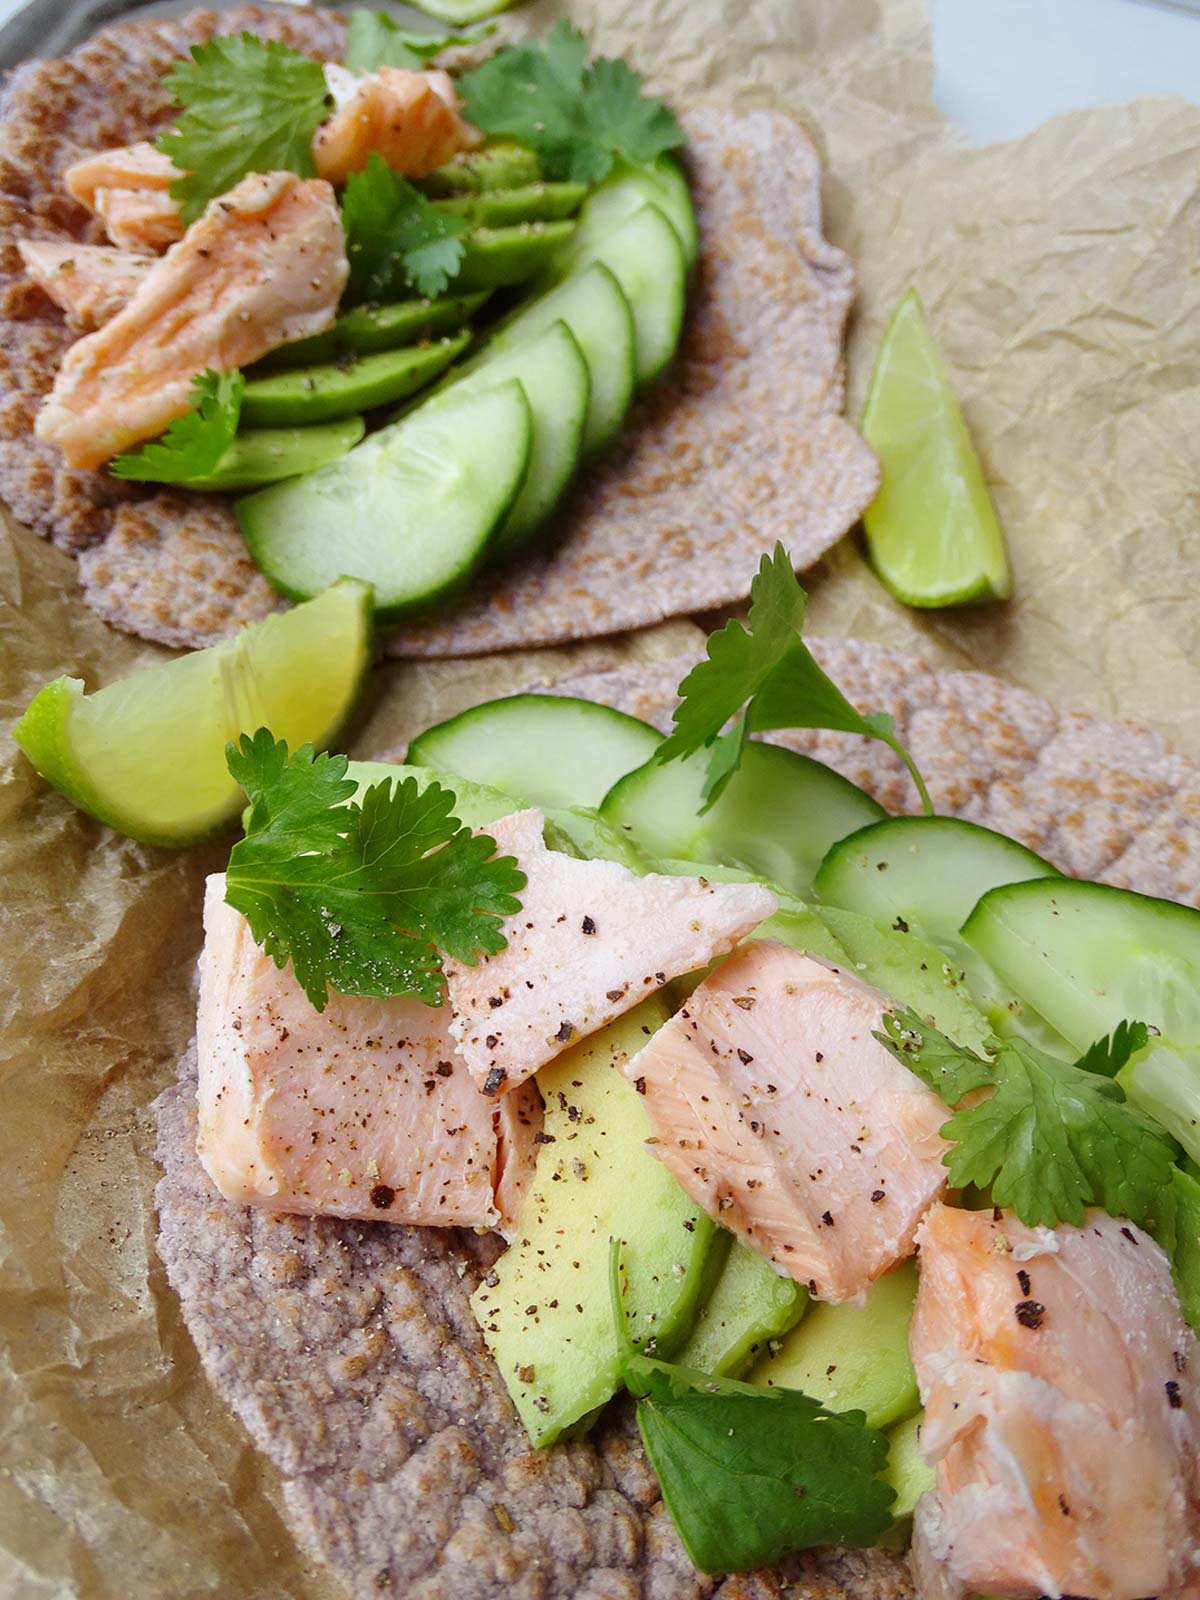 Candida Diet Breakfast - Salmon and Avocado Tacos